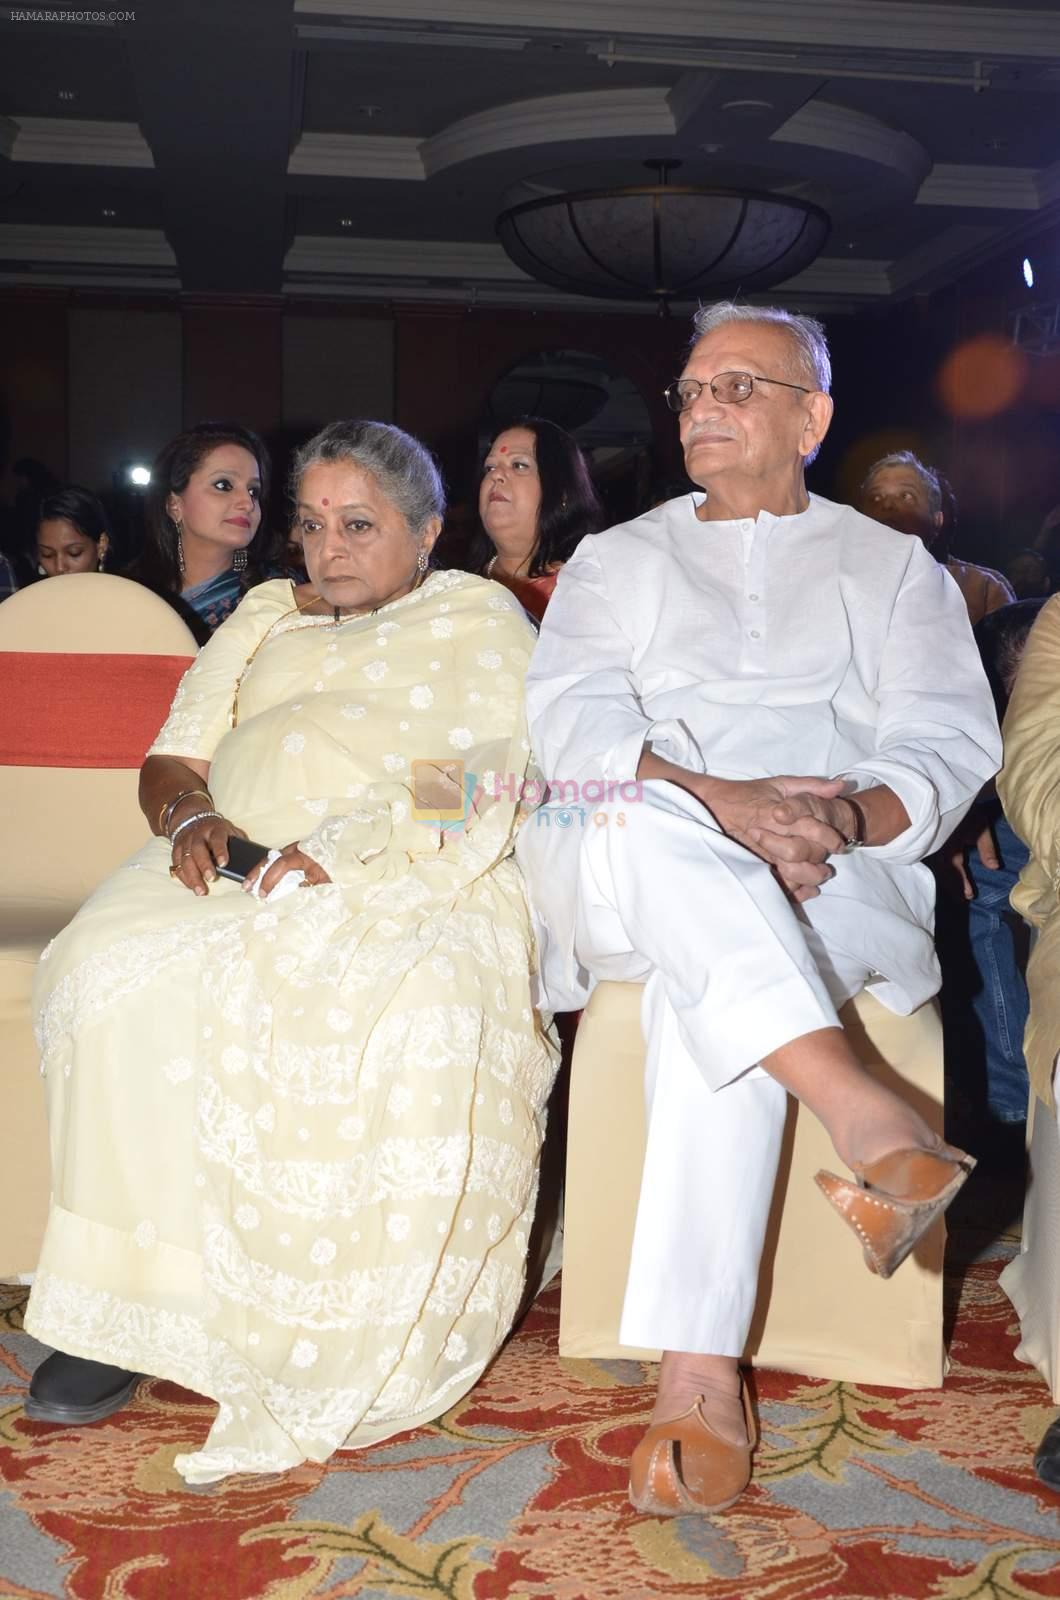 Gulzar at Classical app of SAREGAMA launch in J W Marriott on 15th Sept 2015